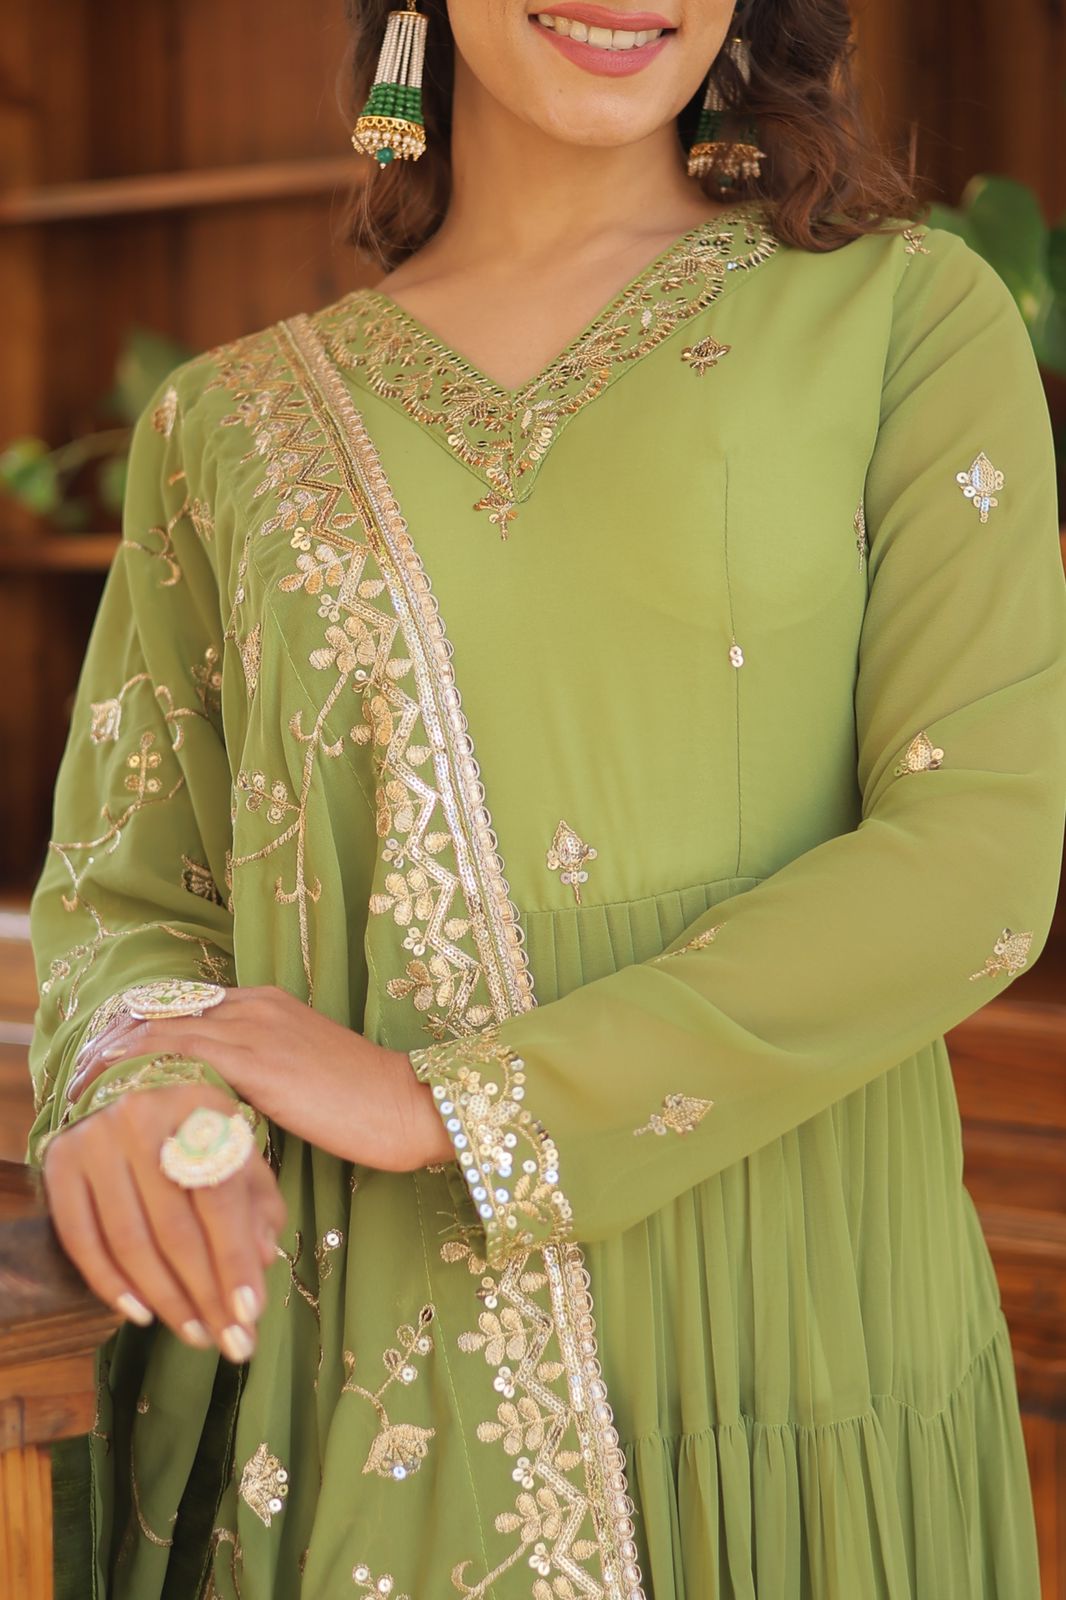 Luxuriant Ruffle Parrot Green Gown With Work Dupatta